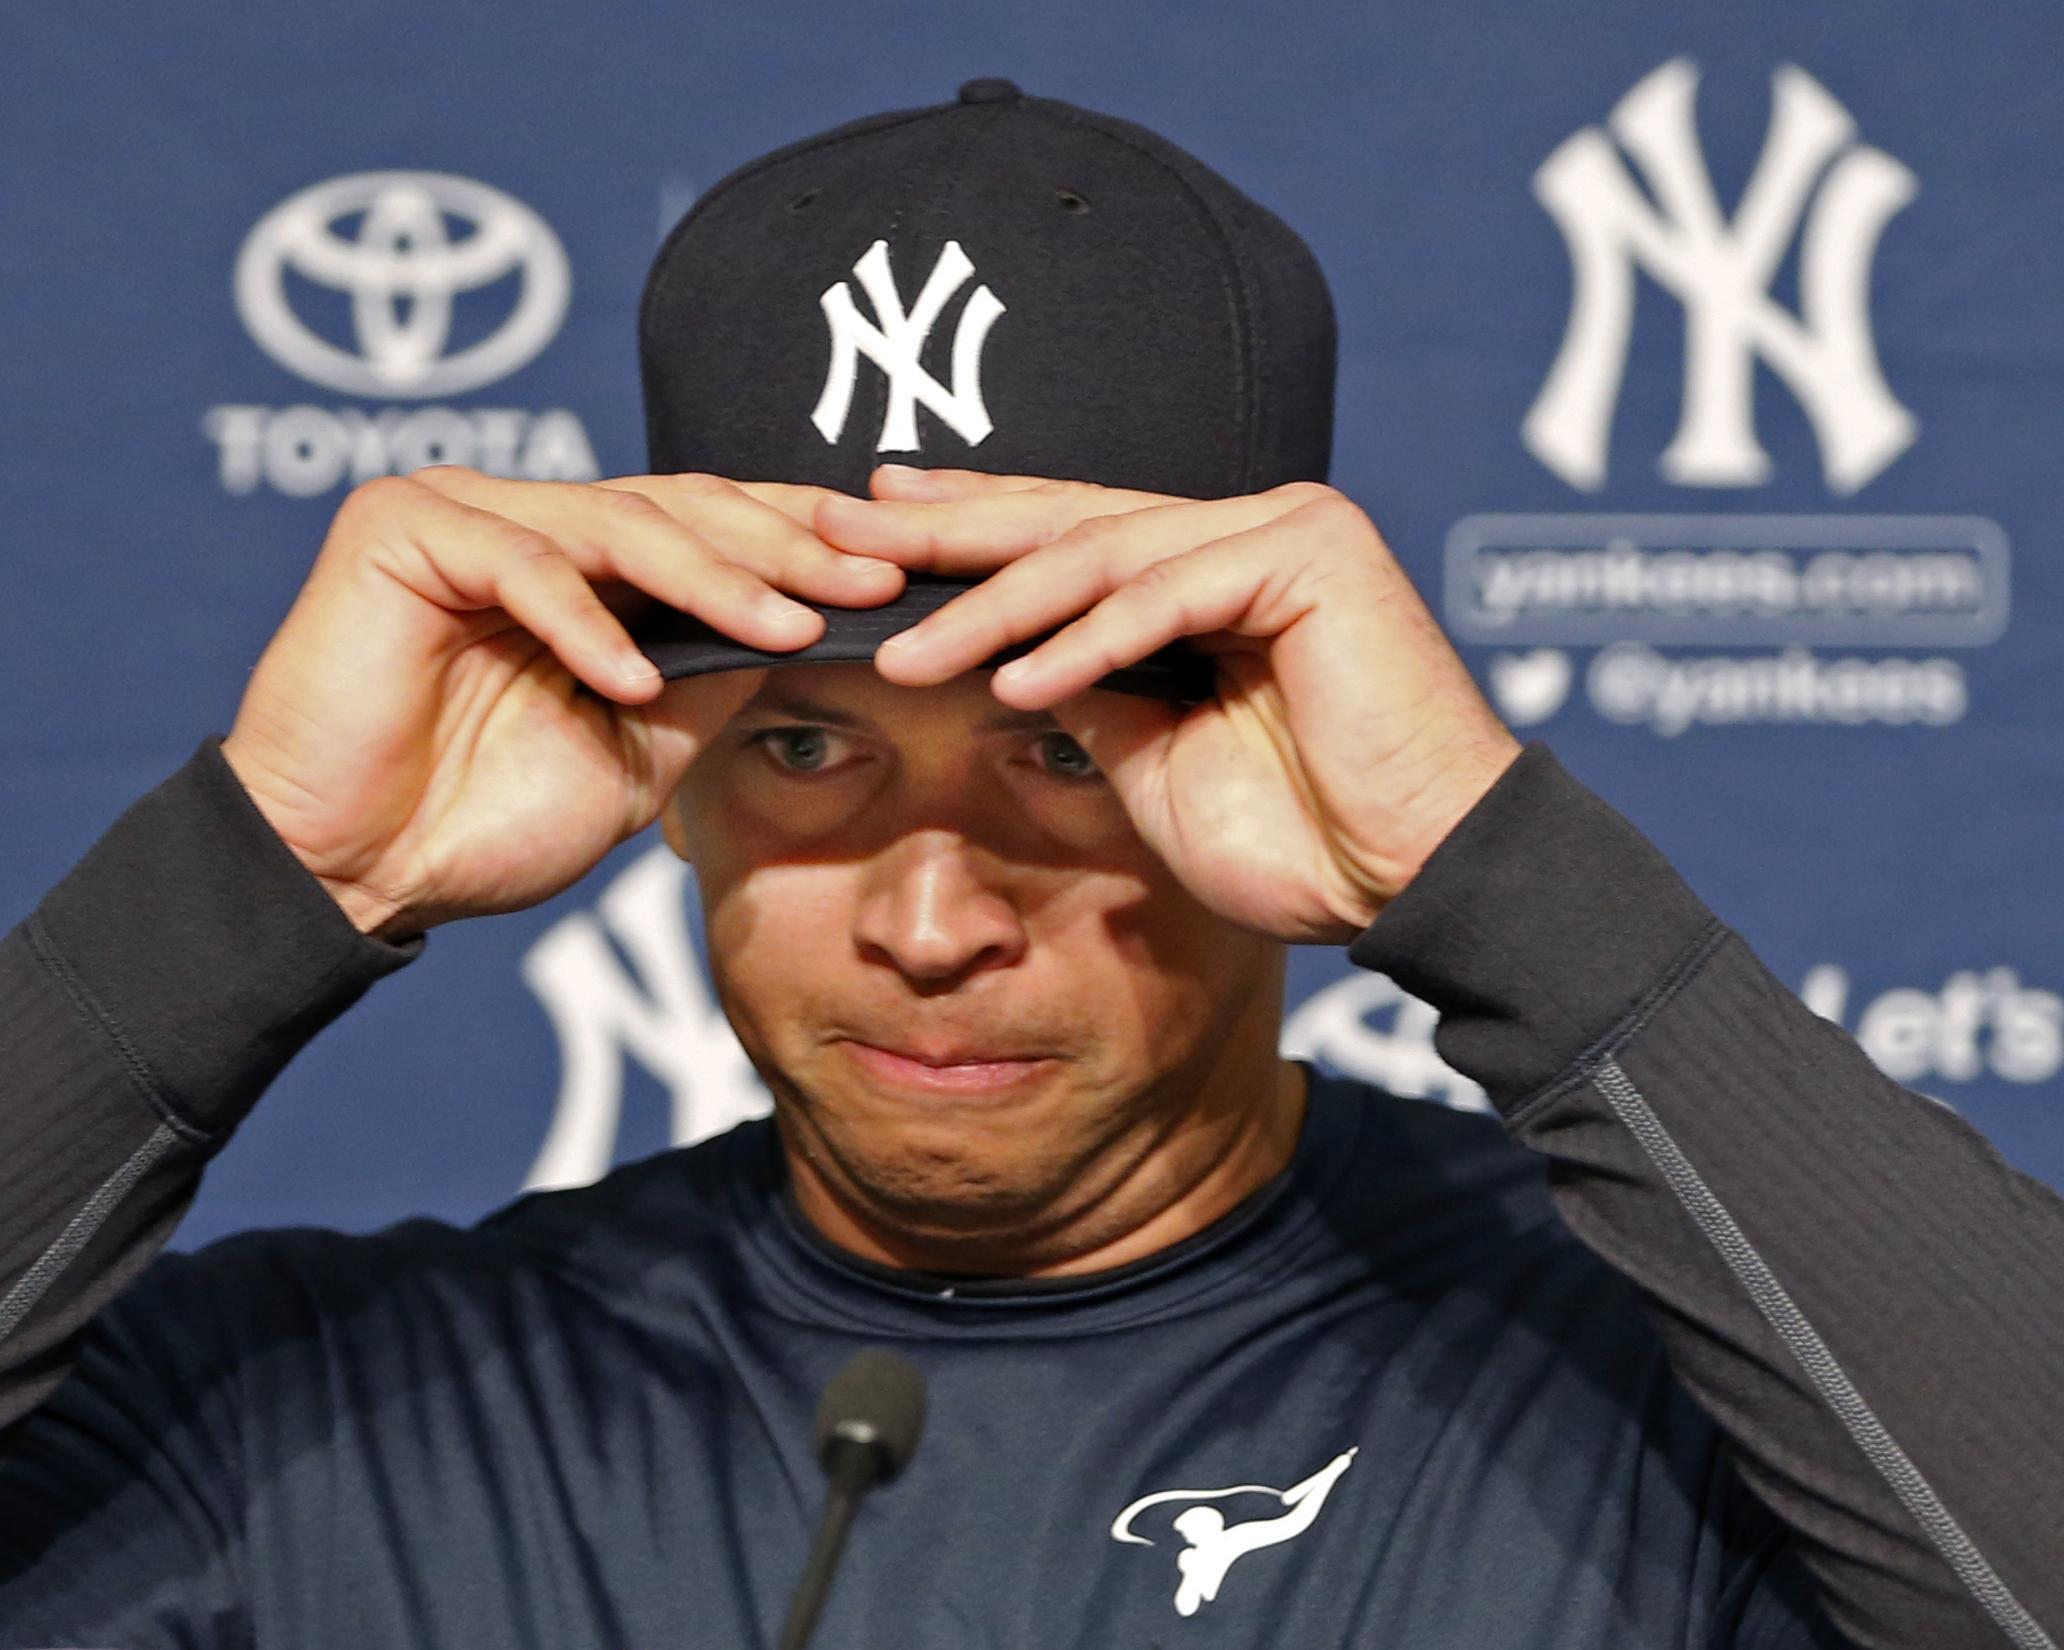 Alex Rodriguez will play his final New York Yankees game on Friday